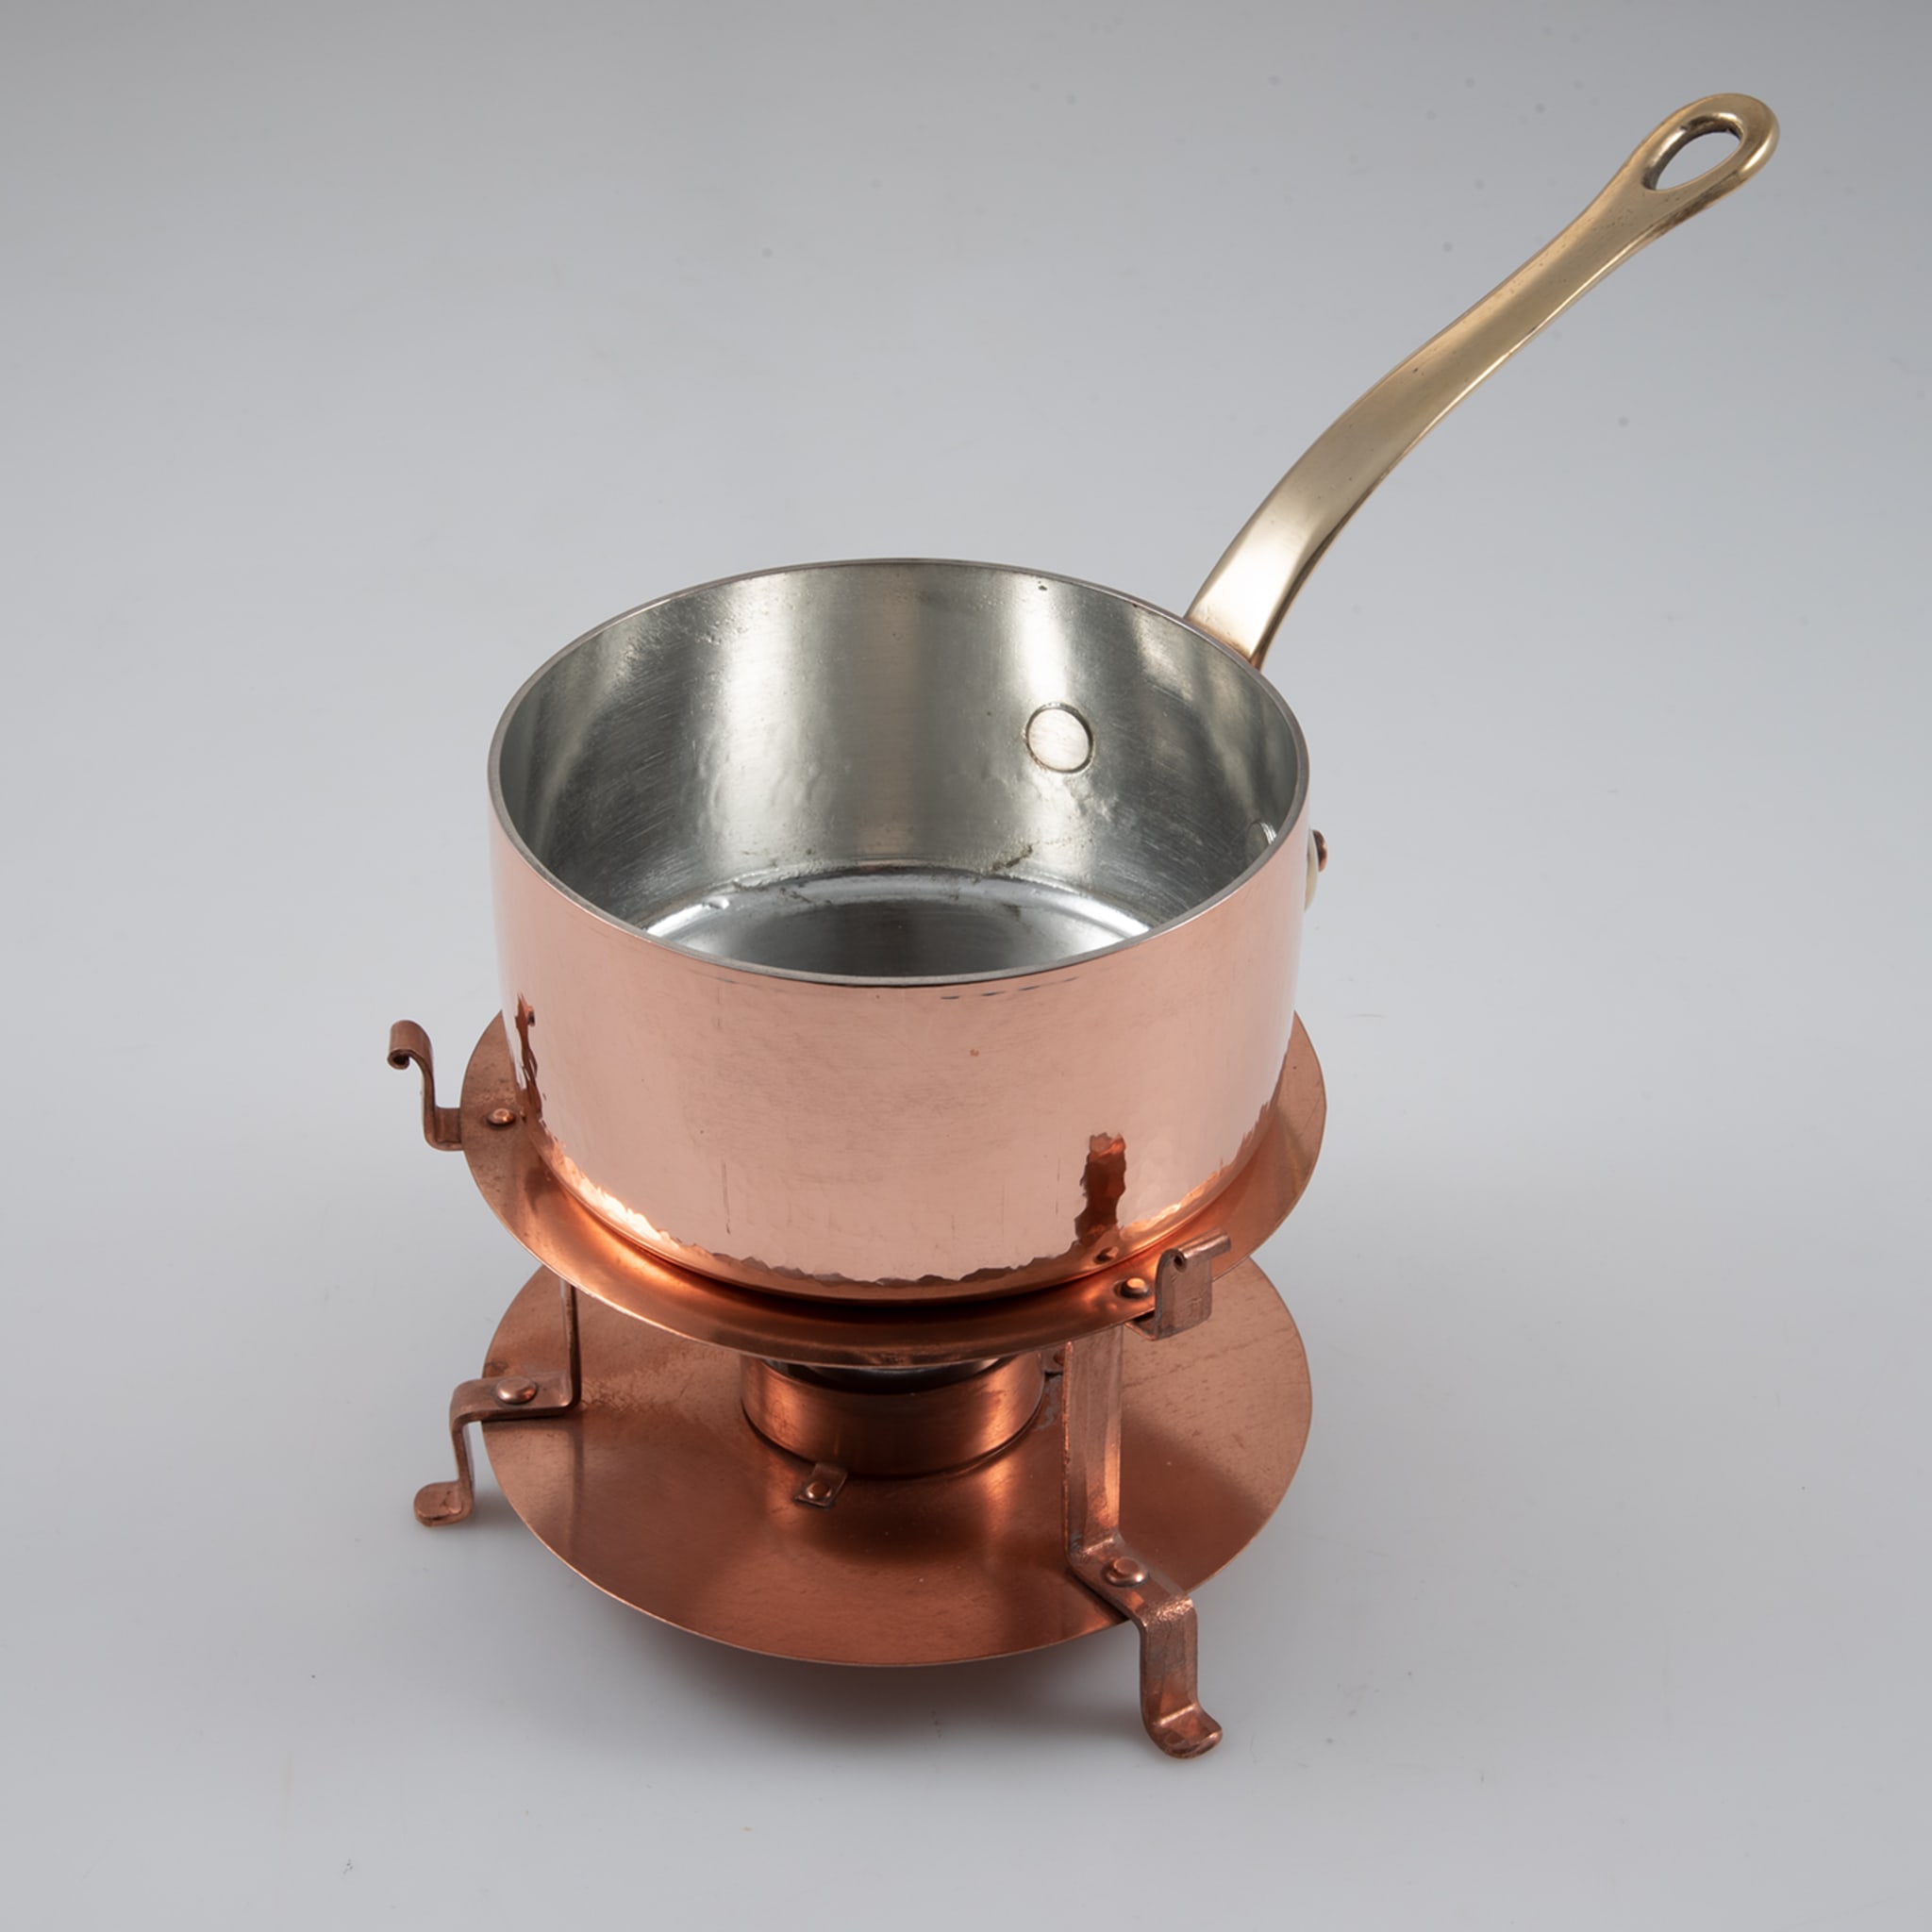 Pedestal Copper Small Pot with Lid - Alternative view 1